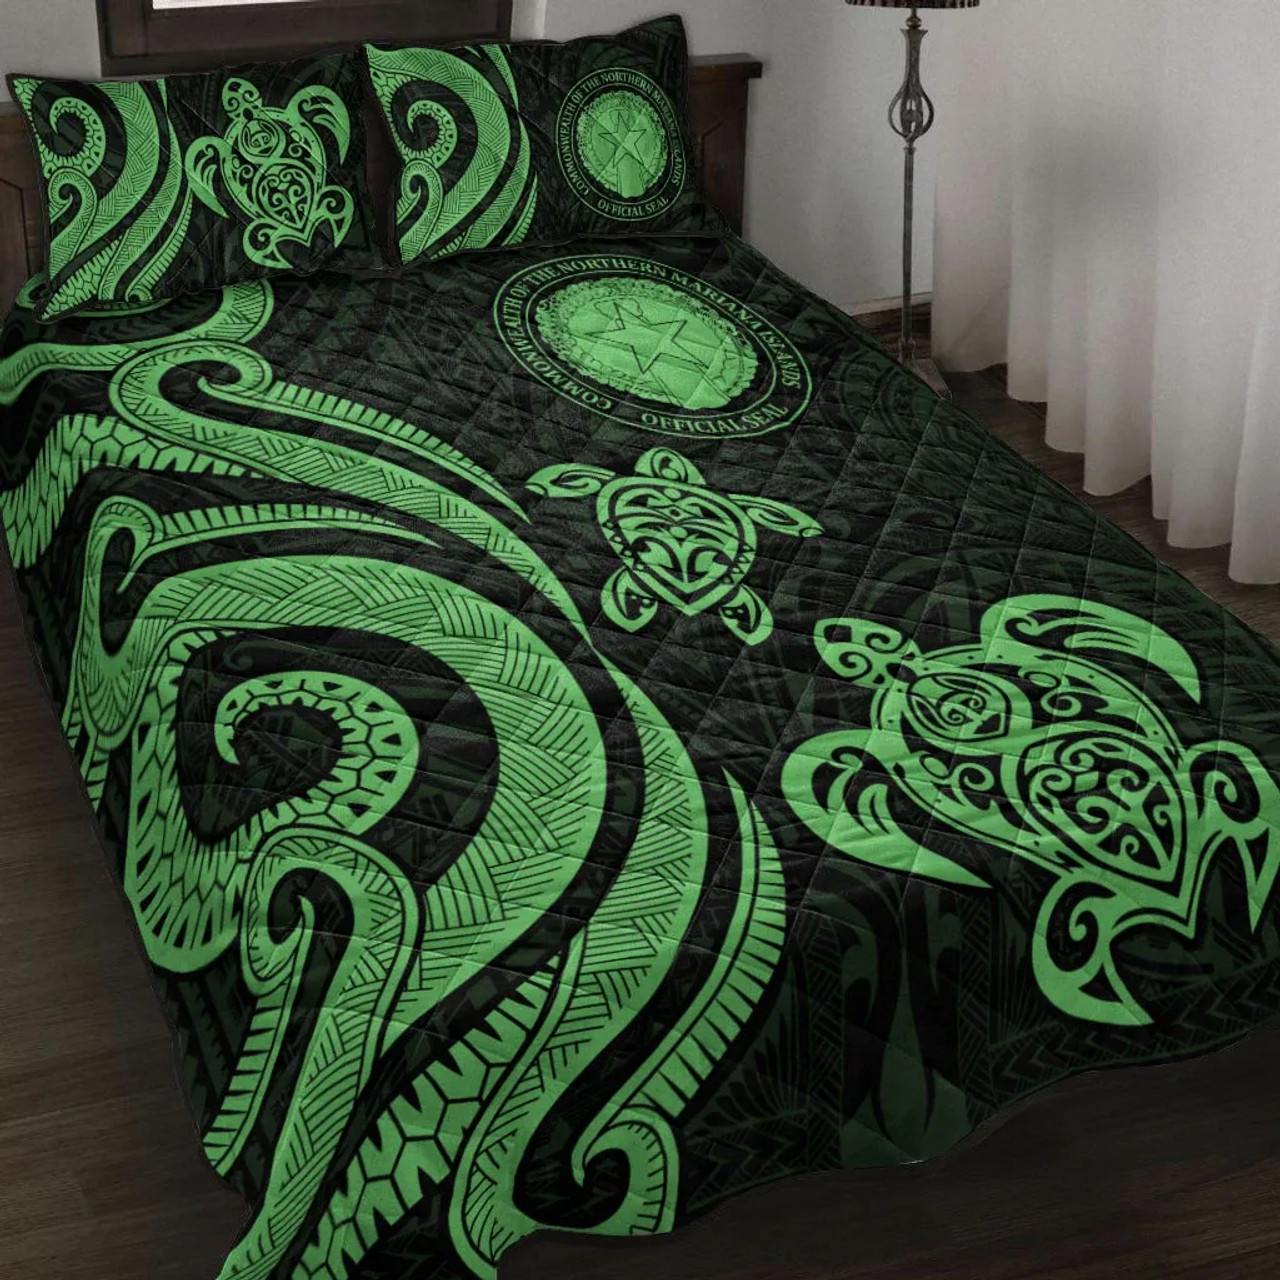 Northern Mariana Islands Quilt Bed Set - Green Tentacle Turtle 1